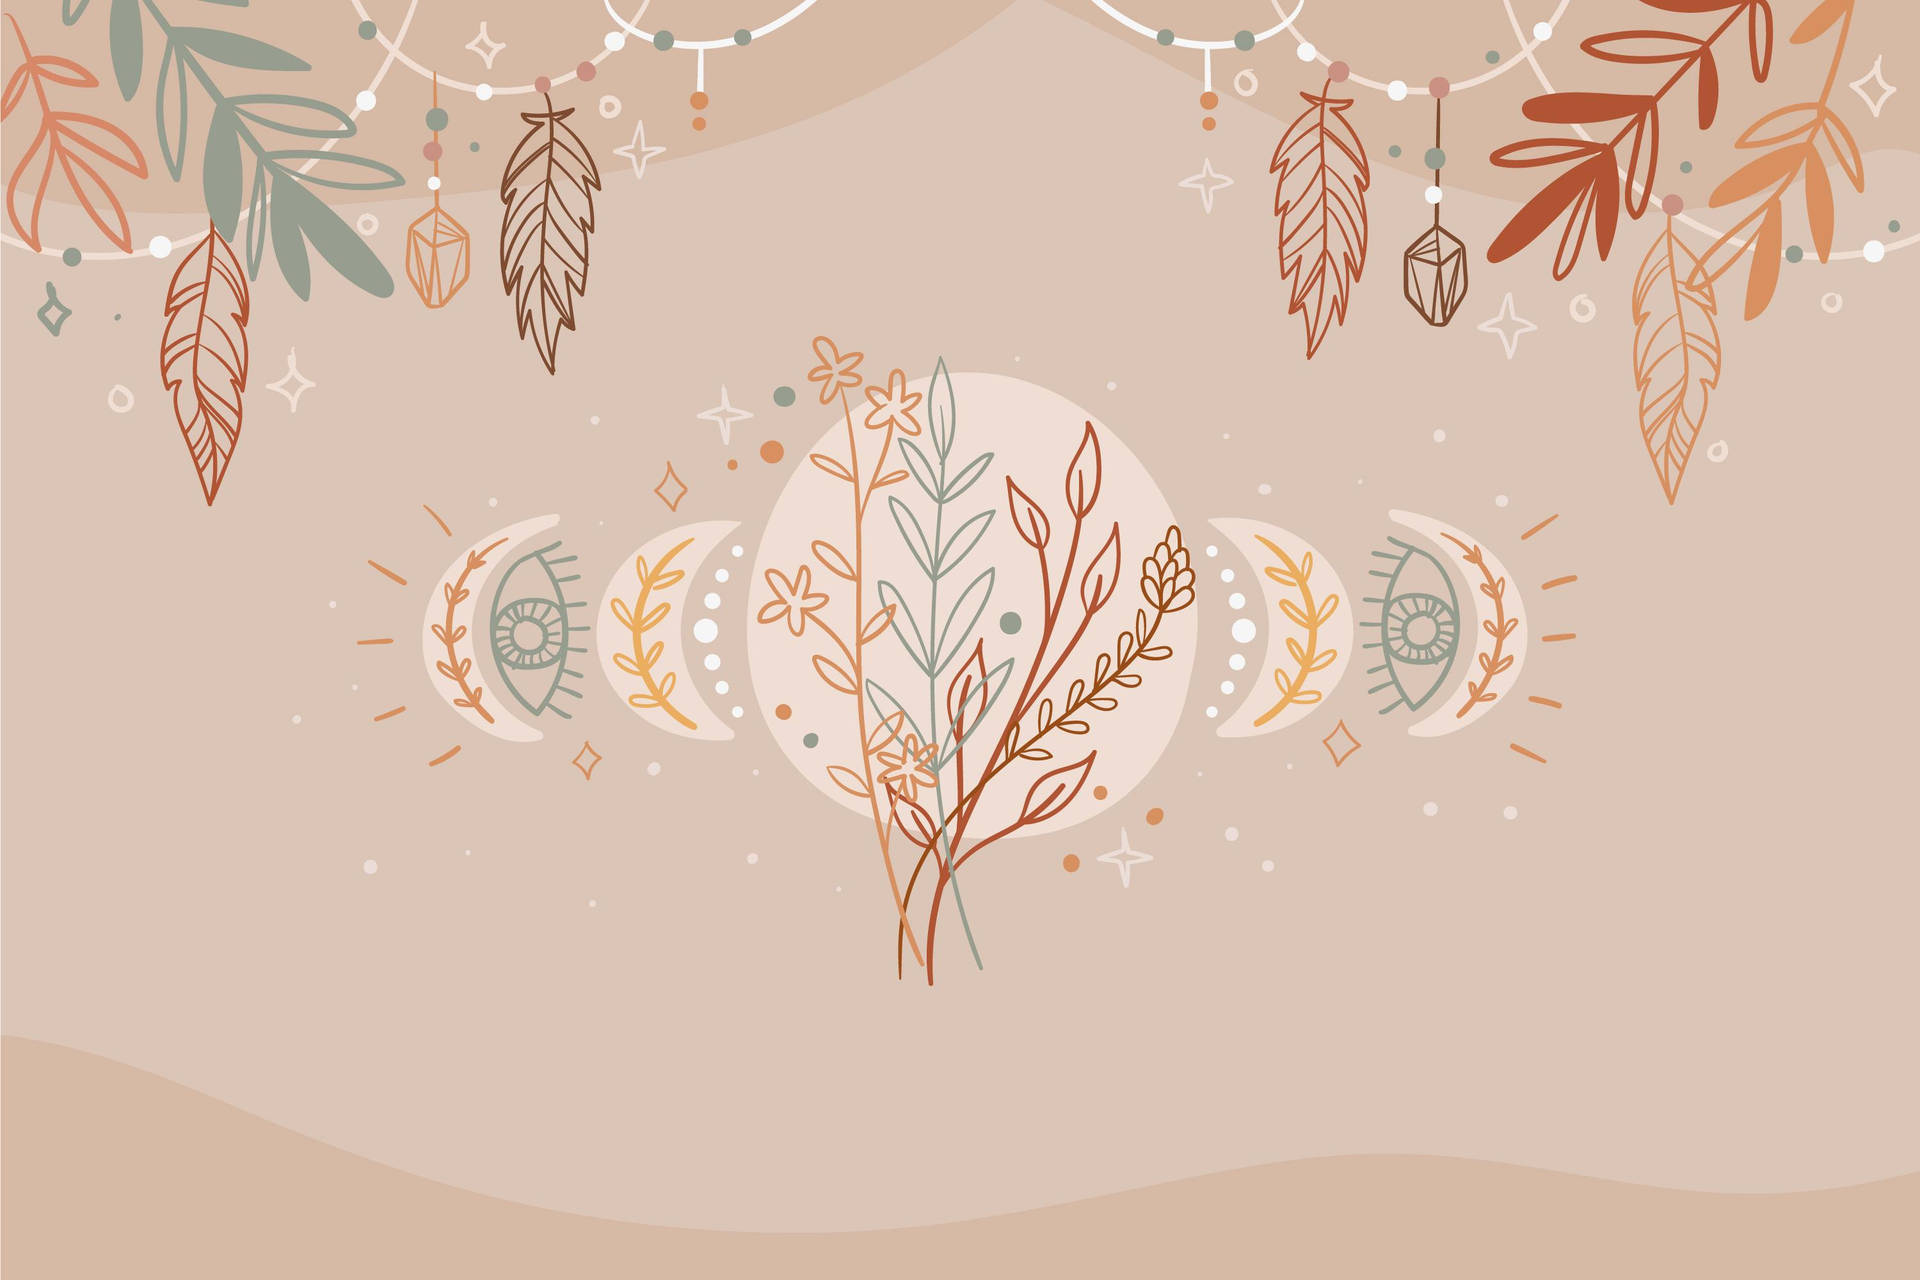 Aesthetic Boho Leaves And Moon Phases Wallpaper